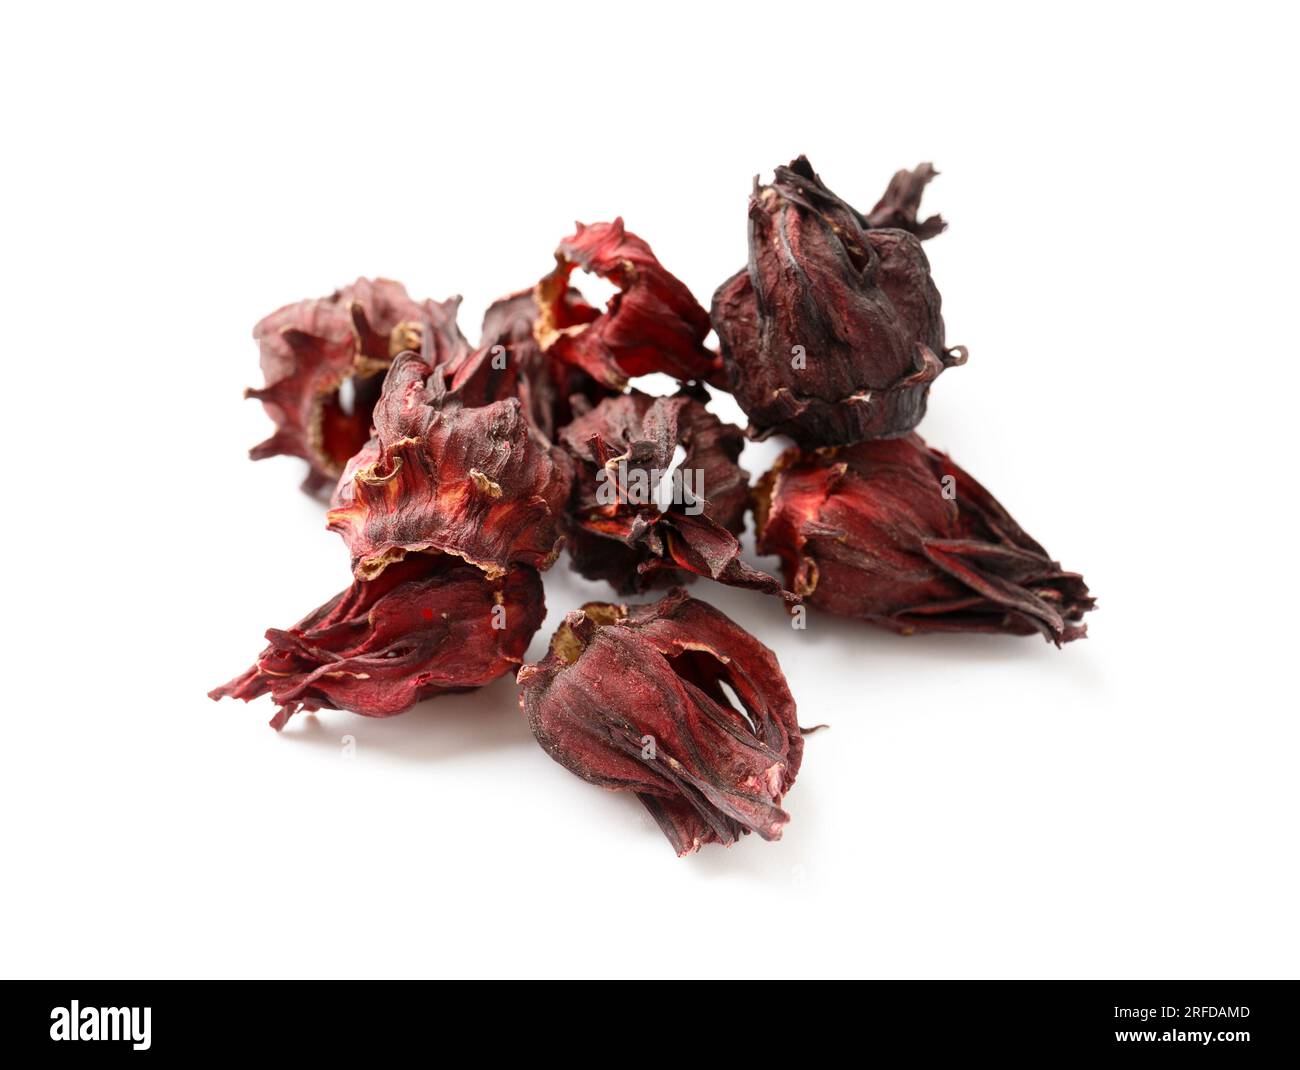 Hibiscus tea on a white background close-up. Dry flowers of red hibiscus on isolation. A handful of hibiscus for making tea. Stock Photo